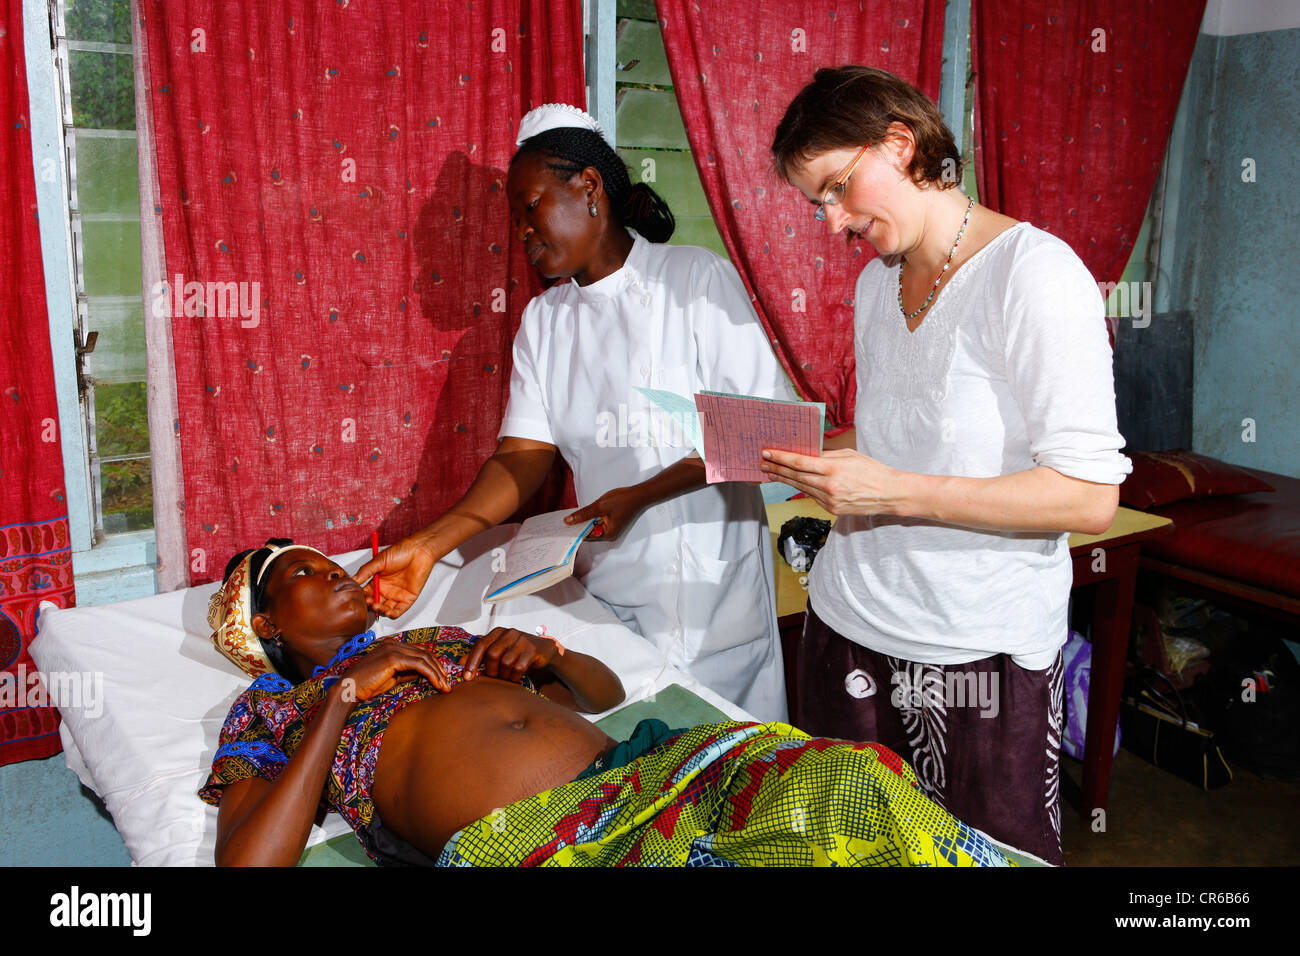 Midwife and doctor examining a pregnant woman, hospital, Manyemen, Cameroon, Africa Stock Photo